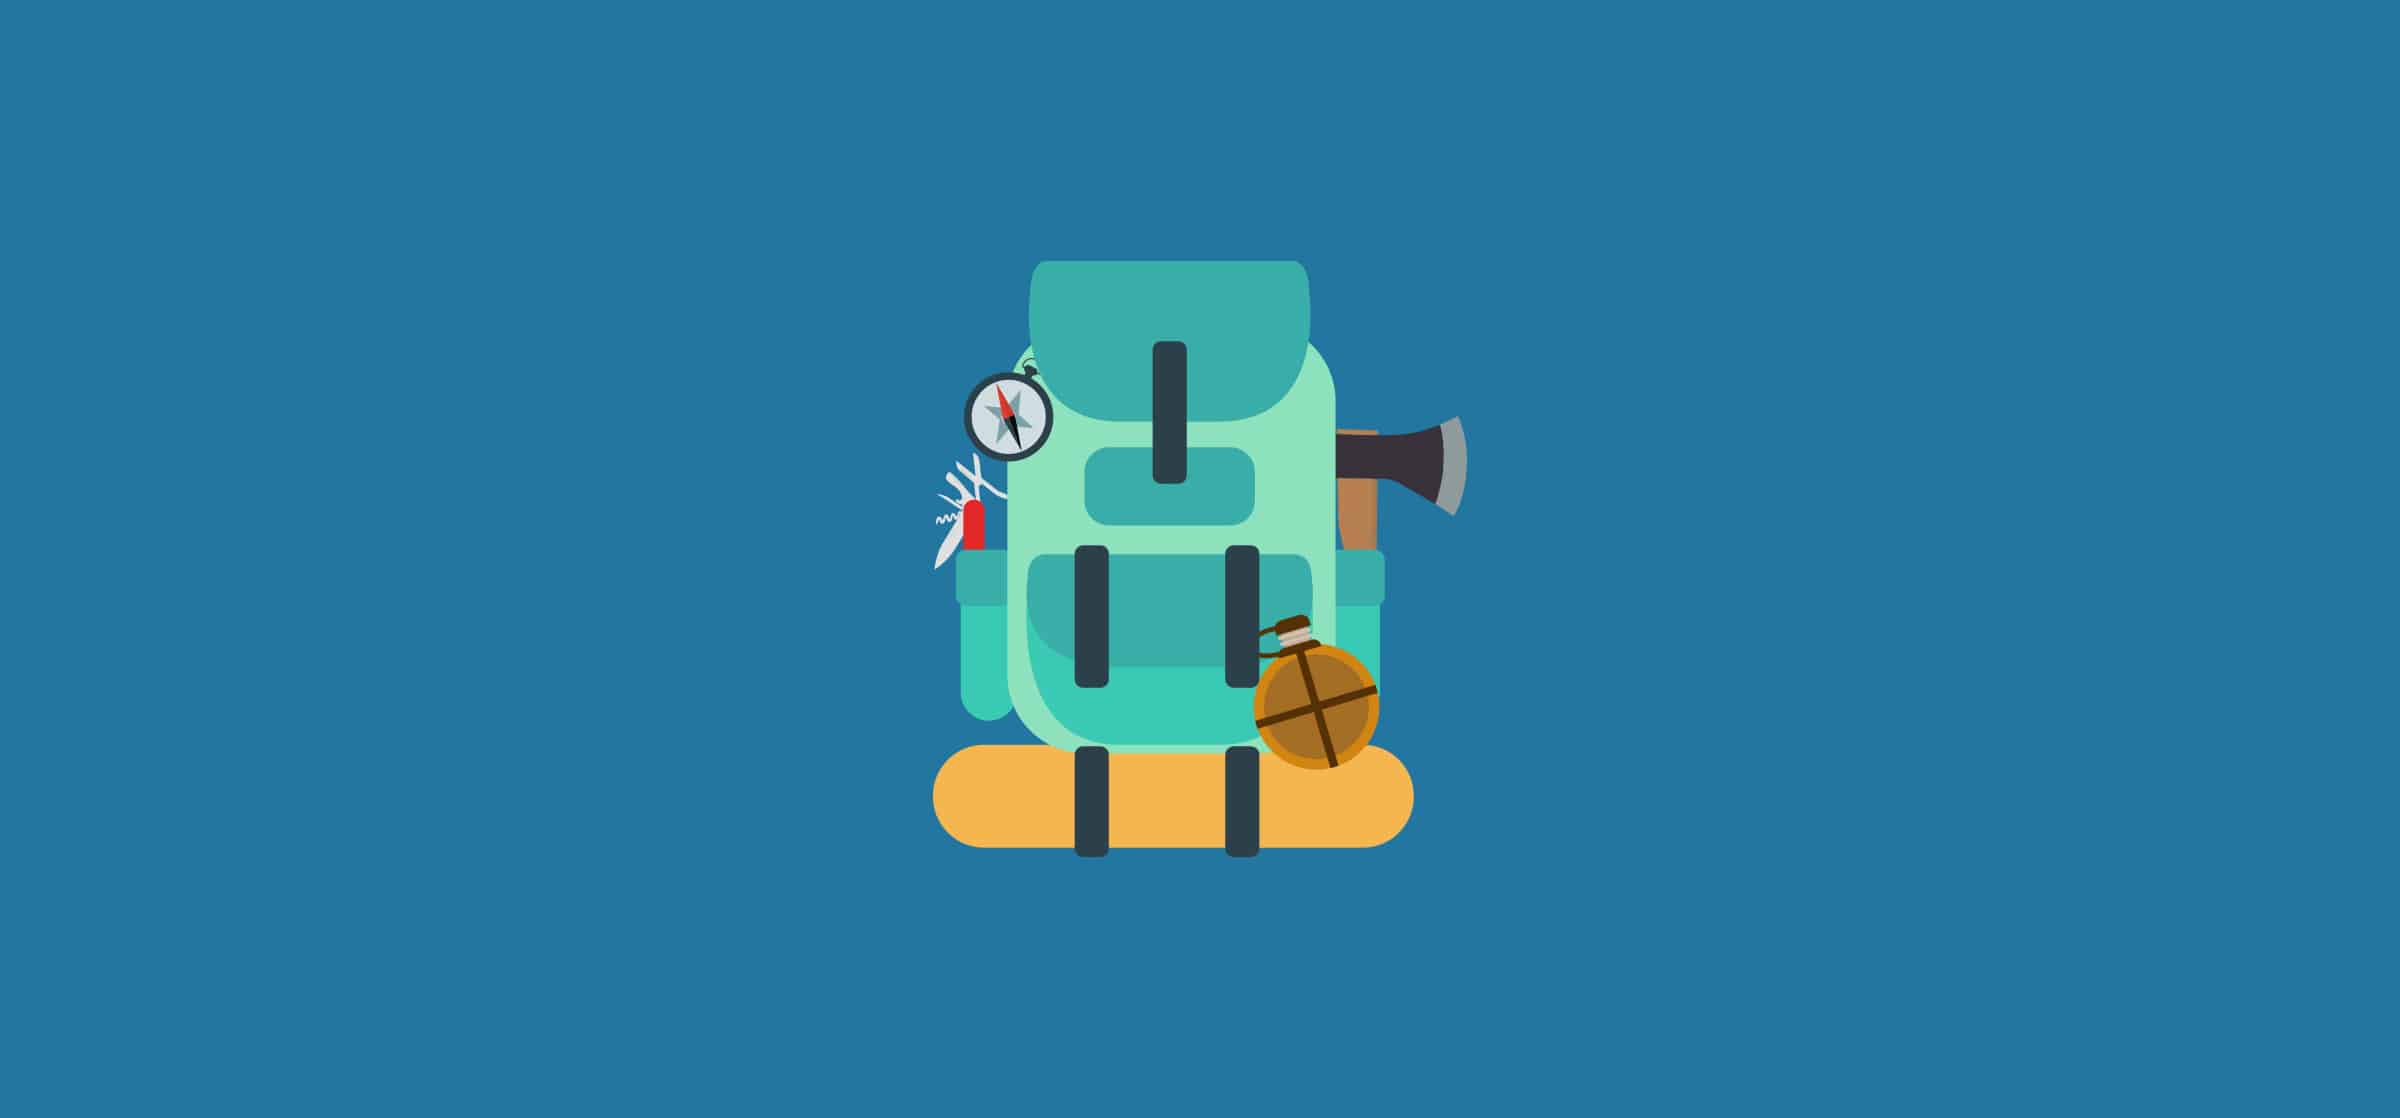 A backpack with compass, hatchet, and canteen